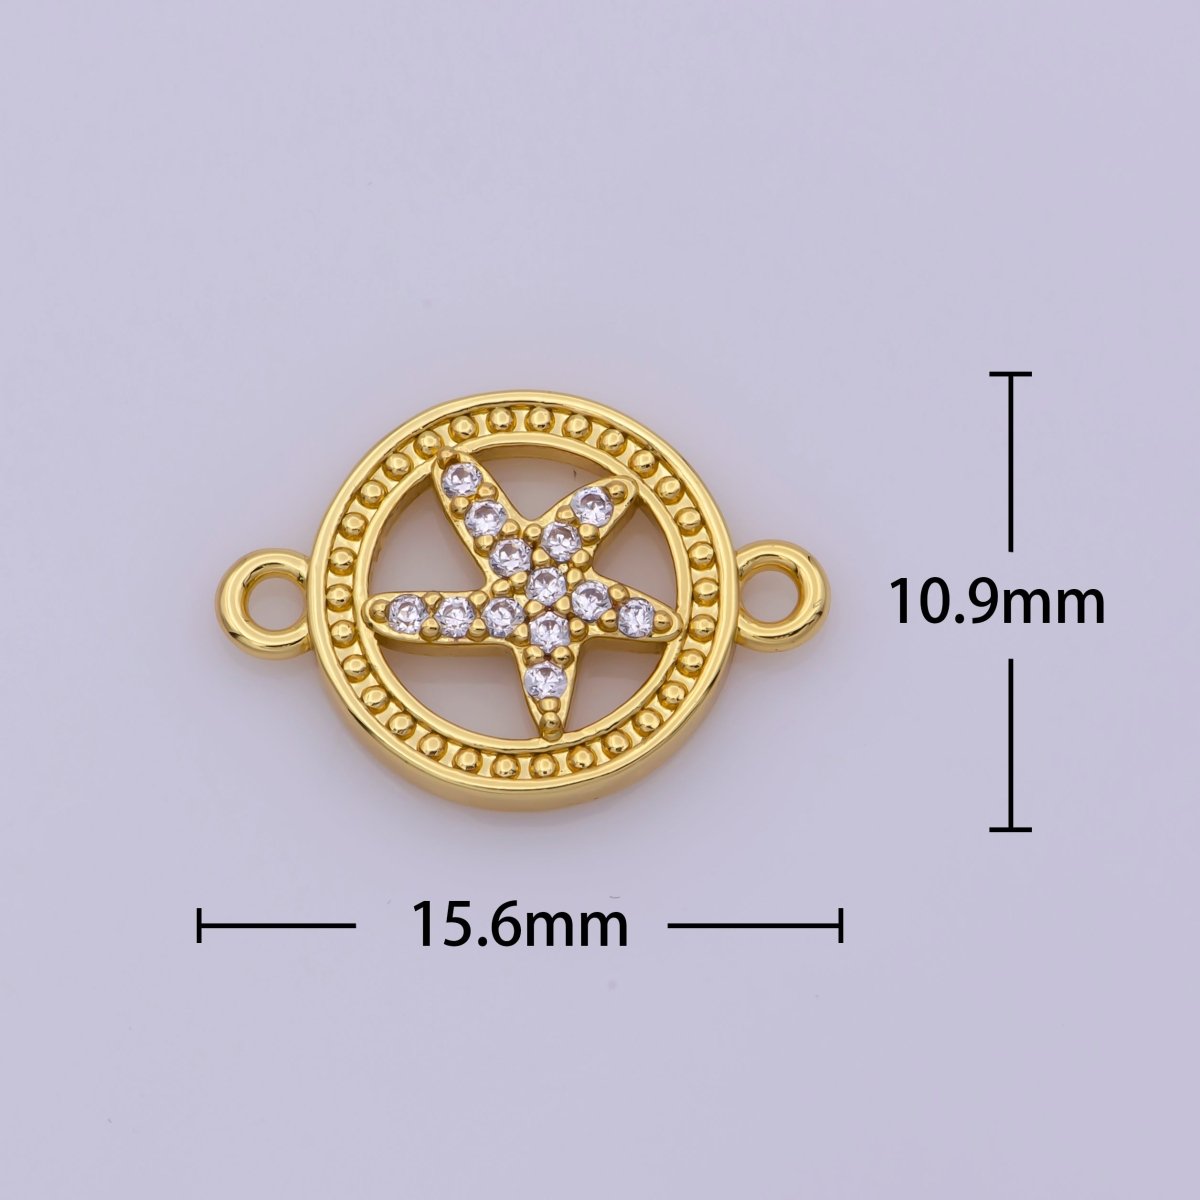 24k Gold Filled Starfish Connector, Star Fish Connector for bracelet necklace earring Supply N-095 - DLUXCA